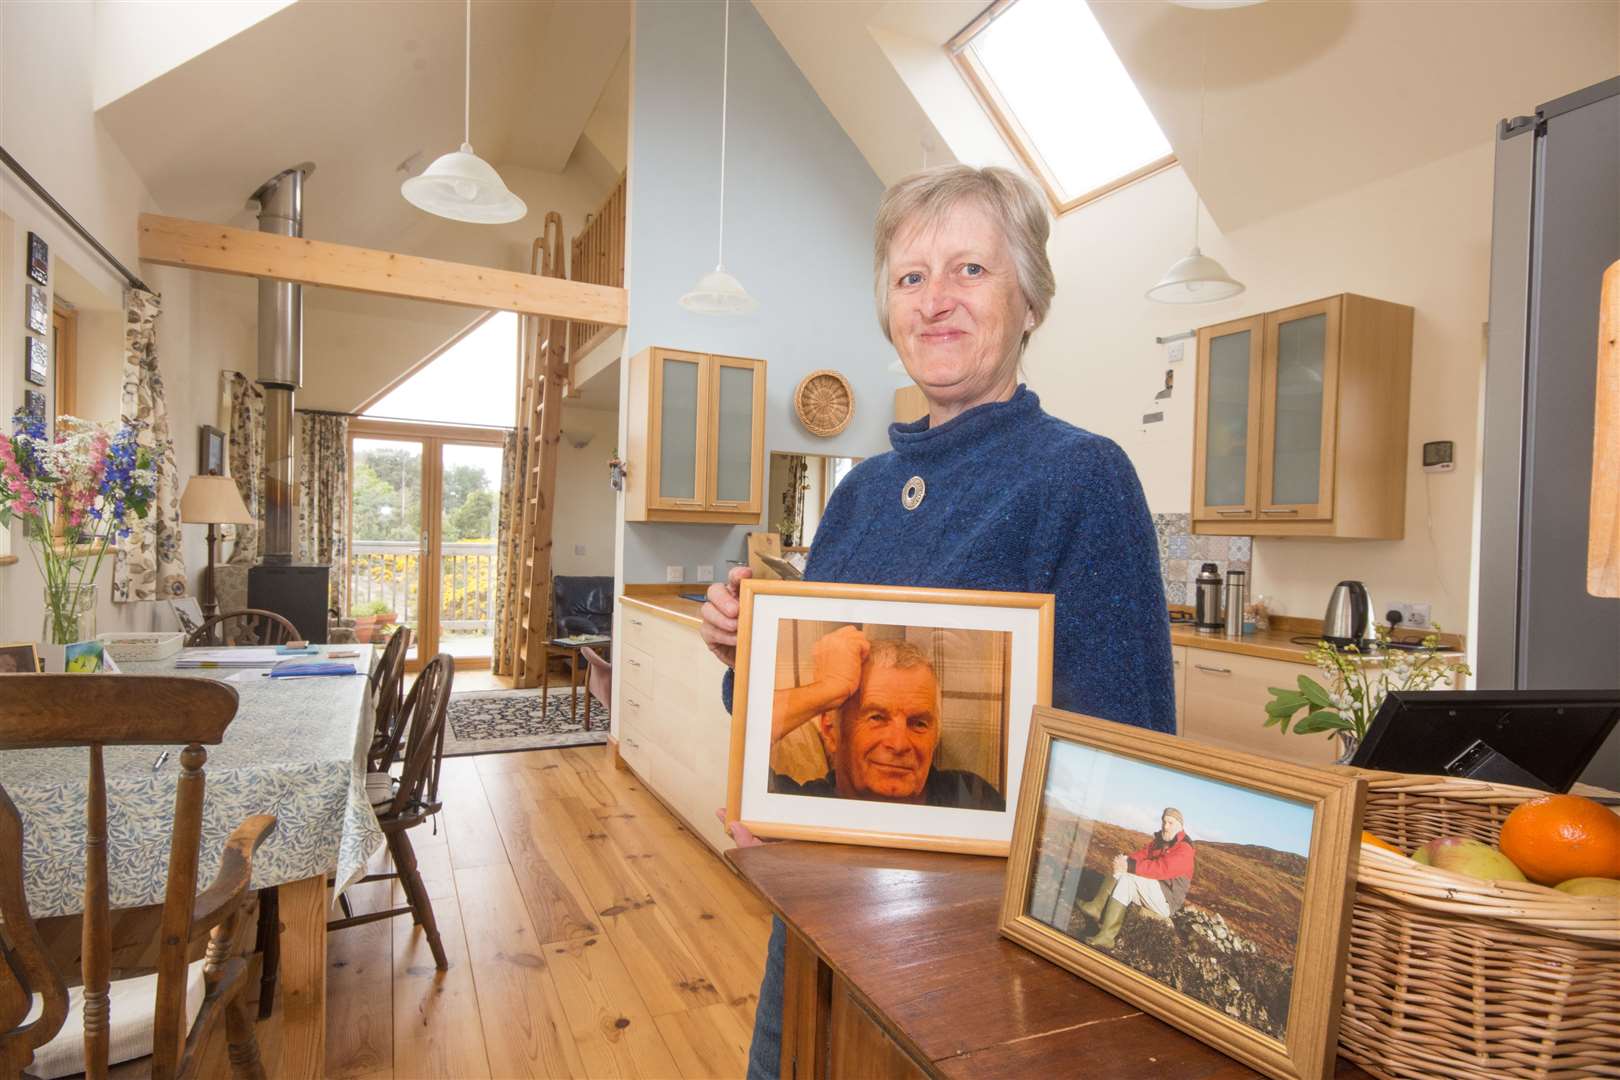 Lori Forsyth's eco house at Findhorn was shown on the BBC's Scotlands Home of the Year. ..Picture: Becky Saunderson. Image No.043937.